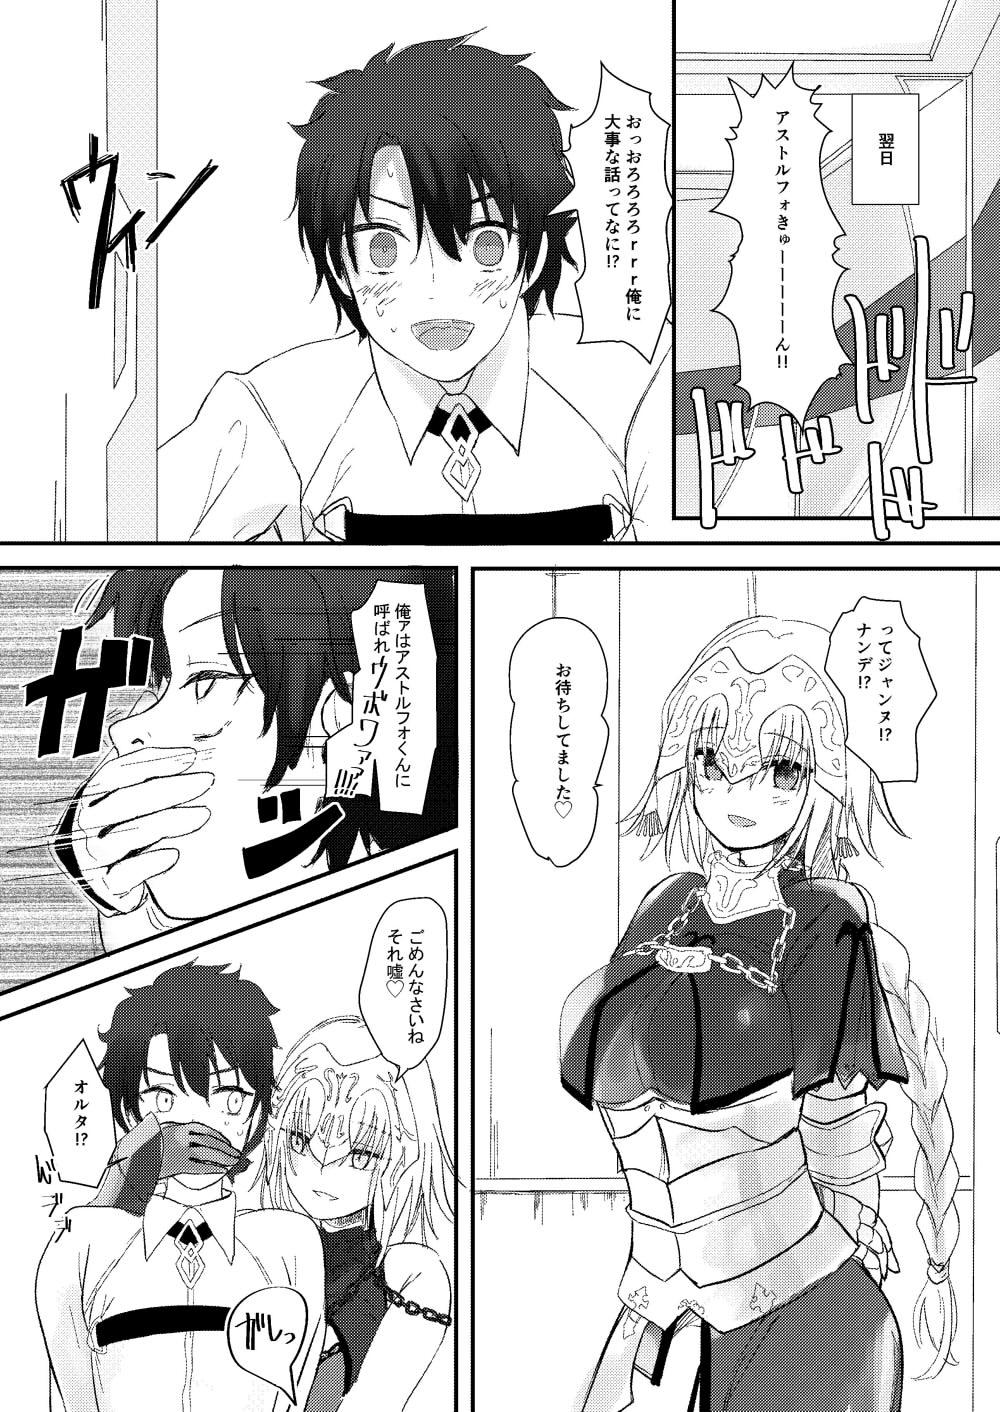 Gay Cut Jeanne to Boku to Jeanne - Fate grand order Teenage - Page 4